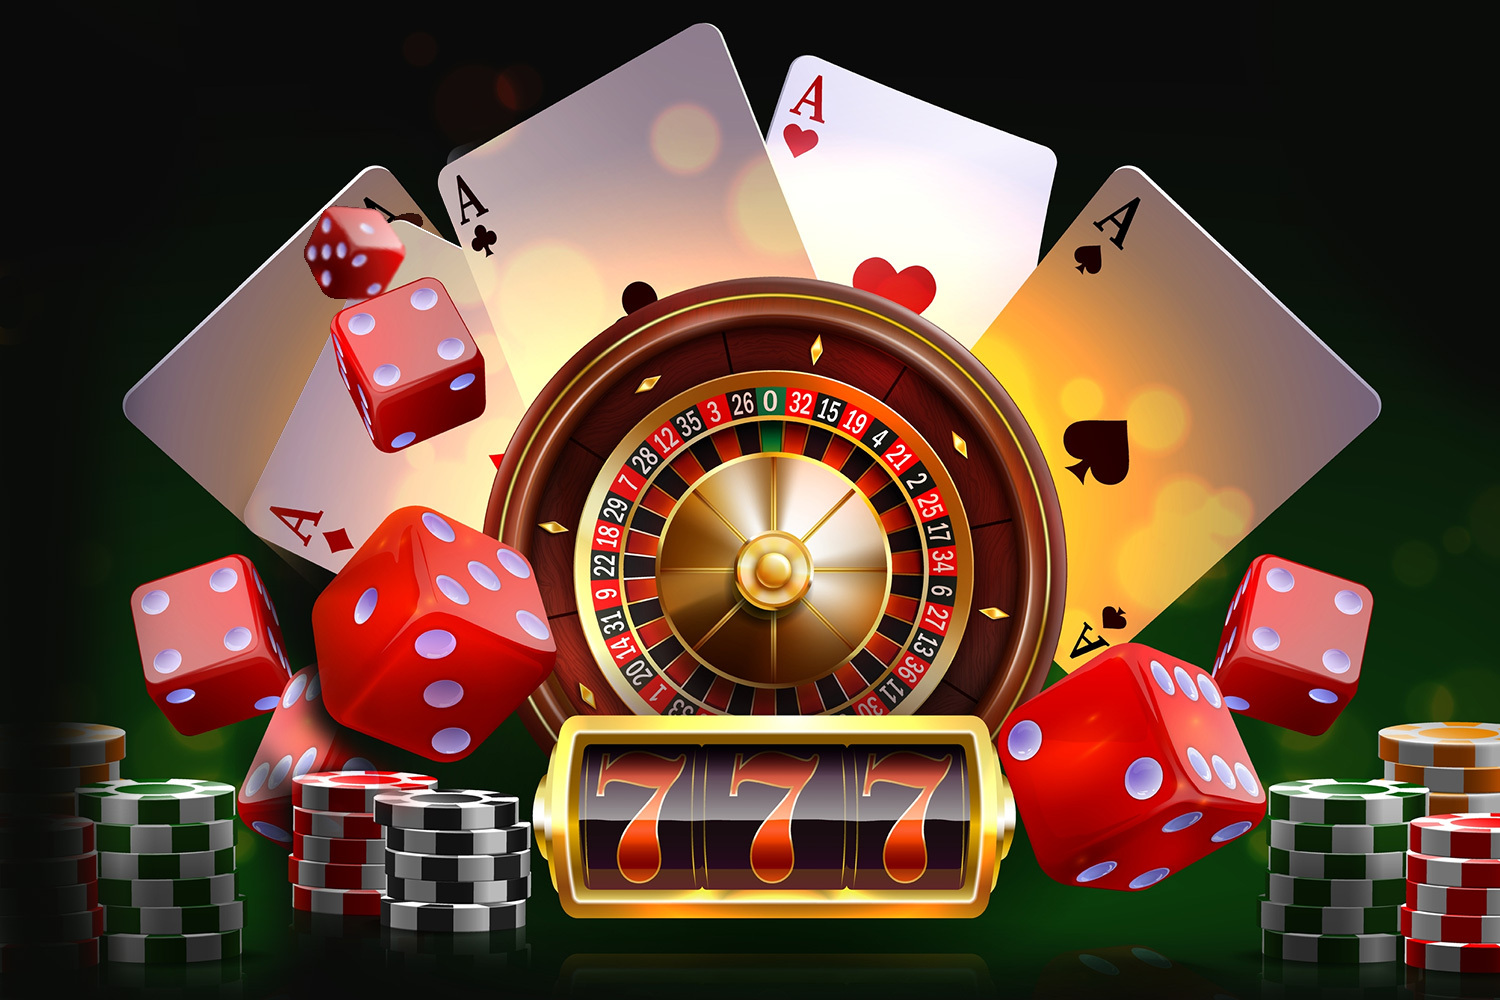 Introduction to Roulette